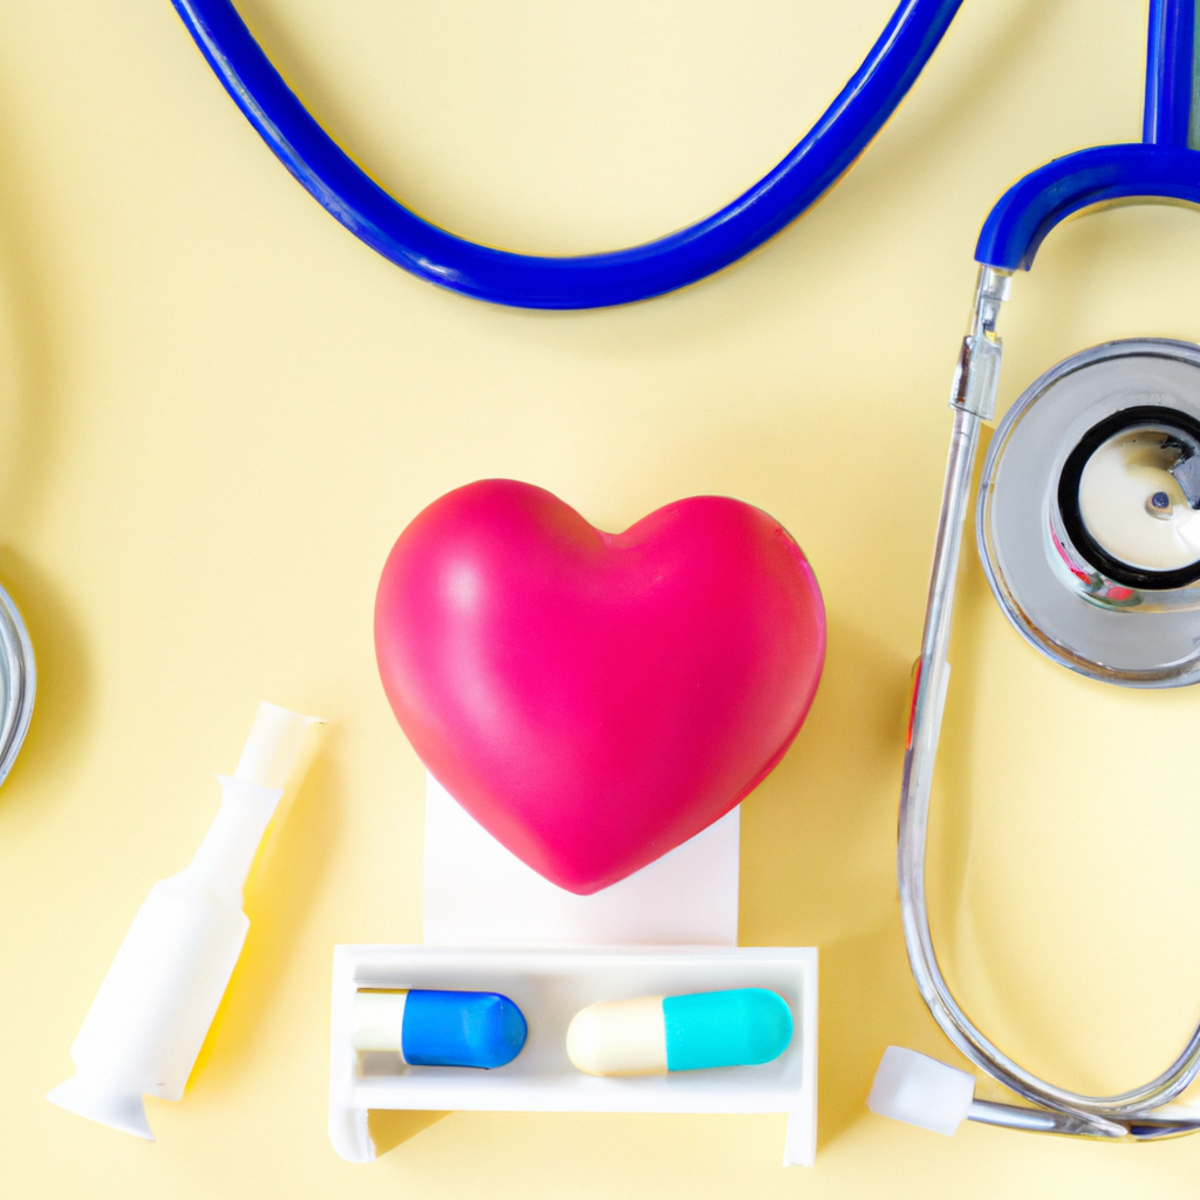 Medical equipment and tools for Fabry Disease diagnosis and treatment, symbolizing the connection to heart health and overcoming misconceptions - Fabry Disease